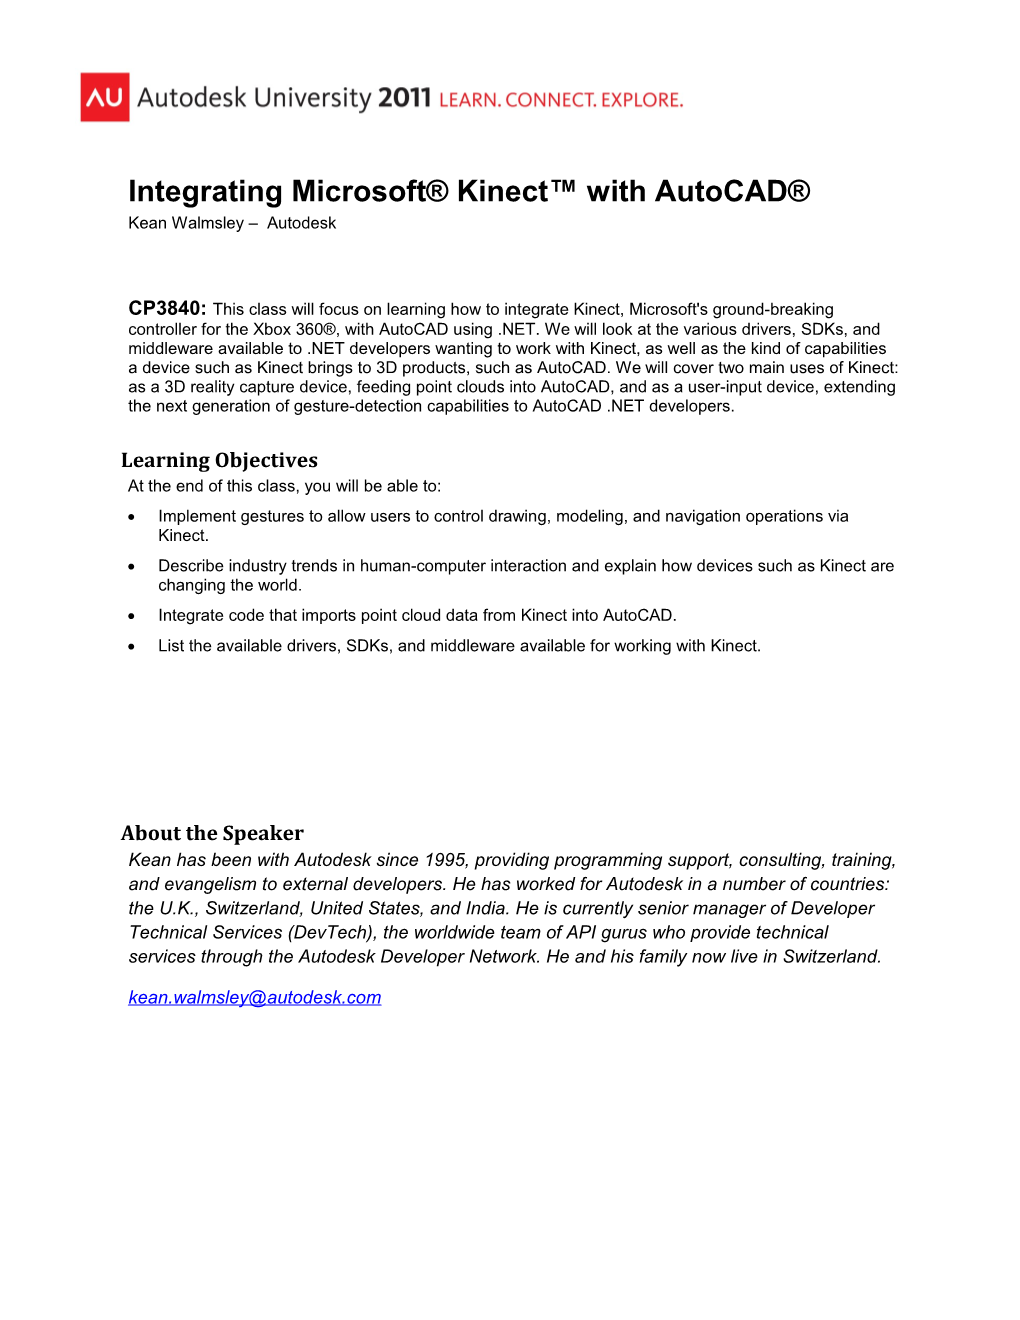 Integrating Microsoft Kinect with Autocad